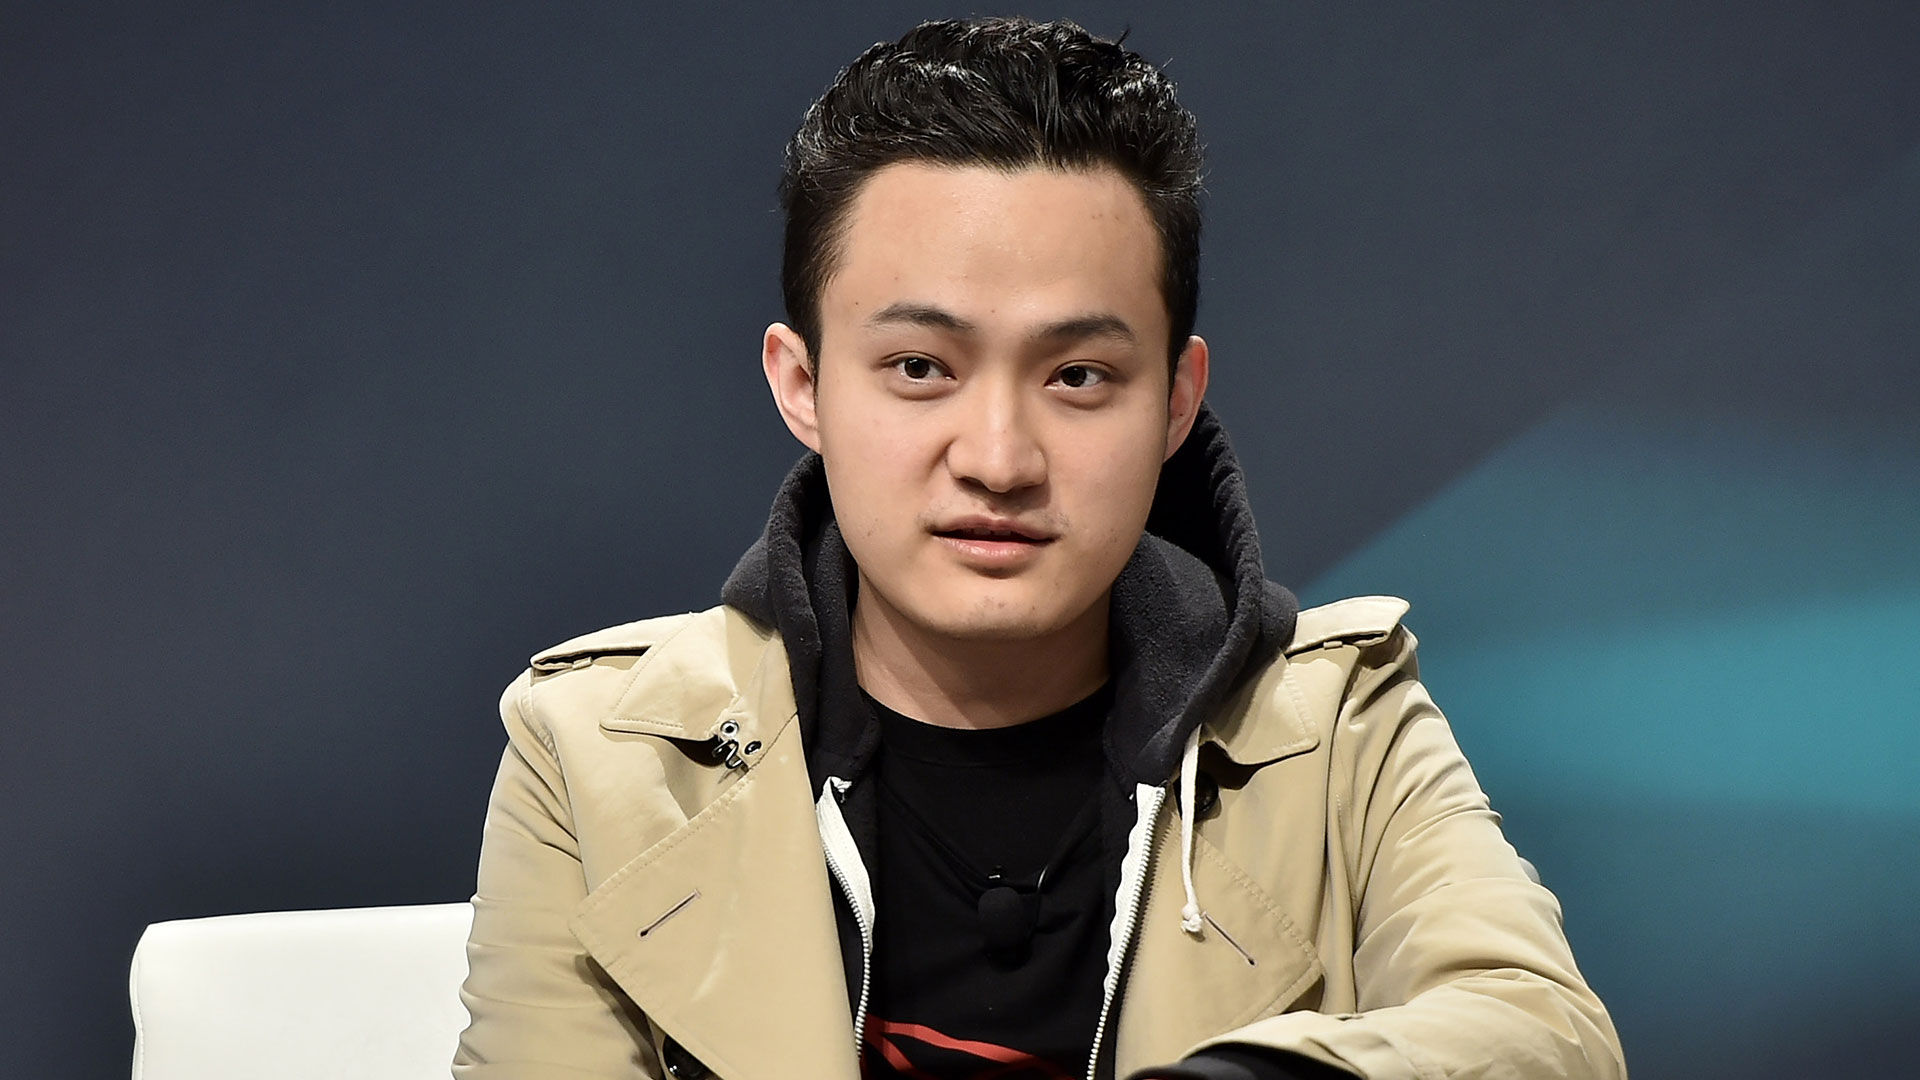 Binance Rejected Justin Sun’s Offer to Buy His Huobi Stake: Source